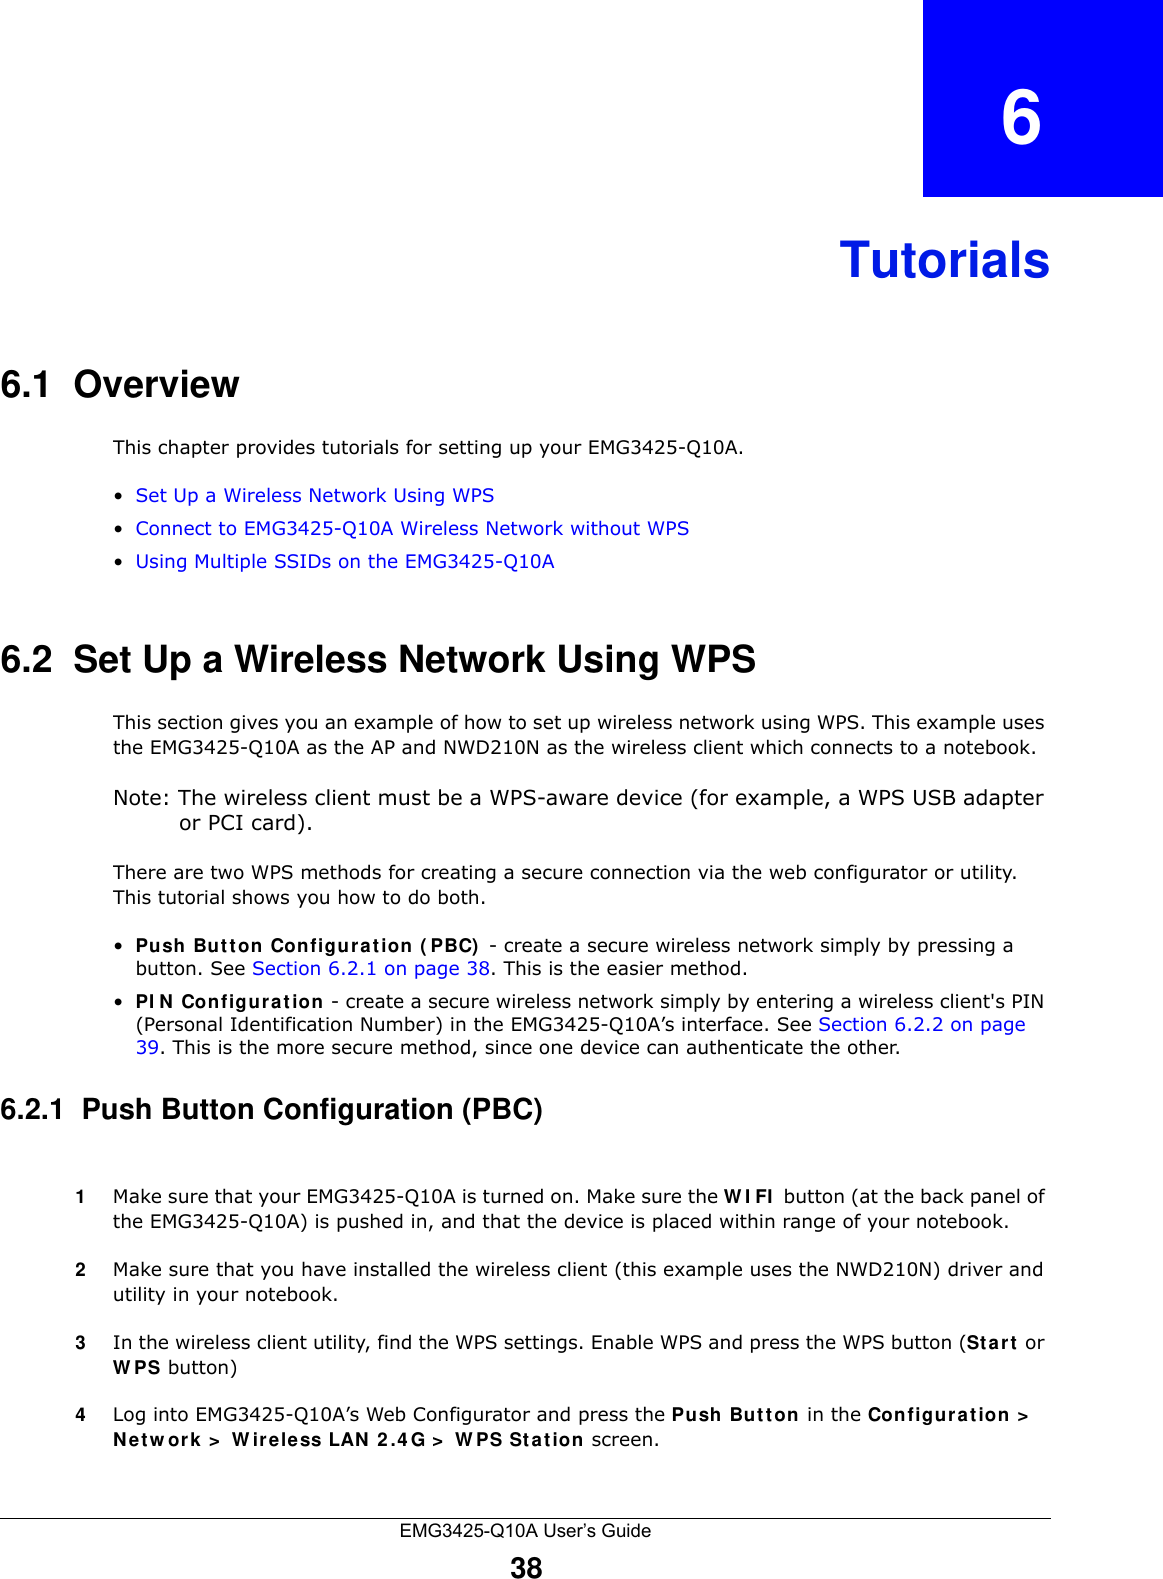 EMG3425-Q10A User’s Guide38CHAPTER   6Tutorials6.1  OverviewThis chapter provides tutorials for setting up your EMG3425-Q10A.•Set Up a Wireless Network Using WPS•Connect to EMG3425-Q10A Wireless Network without WPS•Using Multiple SSIDs on the EMG3425-Q10A6.2  Set Up a Wireless Network Using WPSThis section gives you an example of how to set up wireless network using WPS. This example uses the EMG3425-Q10A as the AP and NWD210N as the wireless client which connects to a notebook. Note: The wireless client must be a WPS-aware device (for example, a WPS USB adapter or PCI card).There are two WPS methods for creating a secure connection via the web configurator or utility. This tutorial shows you how to do both.•Push But t on Configurat ion ( PBC)  - create a secure wireless network simply by pressing a button. See Section 6.2.1 on page 38. This is the easier method.•PI N  Configuration - create a secure wireless network simply by entering a wireless client&apos;s PIN (Personal Identification Number) in the EMG3425-Q10A’s interface. See Section 6.2.2 on page 39. This is the more secure method, since one device can authenticate the other.6.2.1  Push Button Configuration (PBC)1Make sure that your EMG3425-Q10A is turned on. Make sure the W I FI  button (at the back panel of the EMG3425-Q10A) is pushed in, and that the device is placed within range of your notebook. 2Make sure that you have installed the wireless client (this example uses the NWD210N) driver and utility in your notebook.3In the wireless client utility, find the WPS settings. Enable WPS and press the WPS button (St a r t  or W PS button)4Log into EMG3425-Q10A’s Web Configurator and press the Pu sh But t on in the Configuration &gt;  N e tw ork &gt;  W ir ele ss LAN  2 .4 G &gt;  W PS St a t ion screen. 